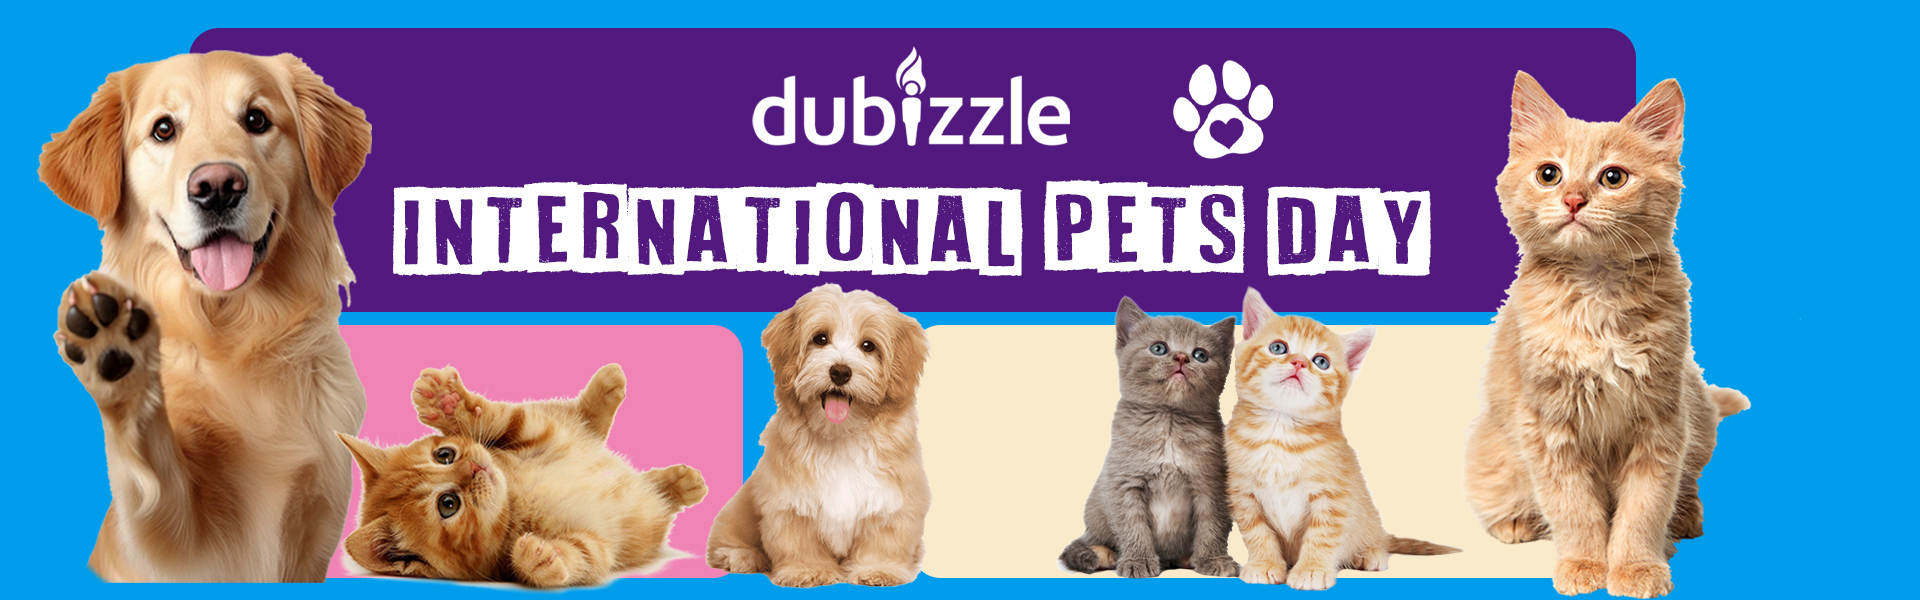 A Purr-fect Day with BDD’s Cats Celebrating International Pets Day!